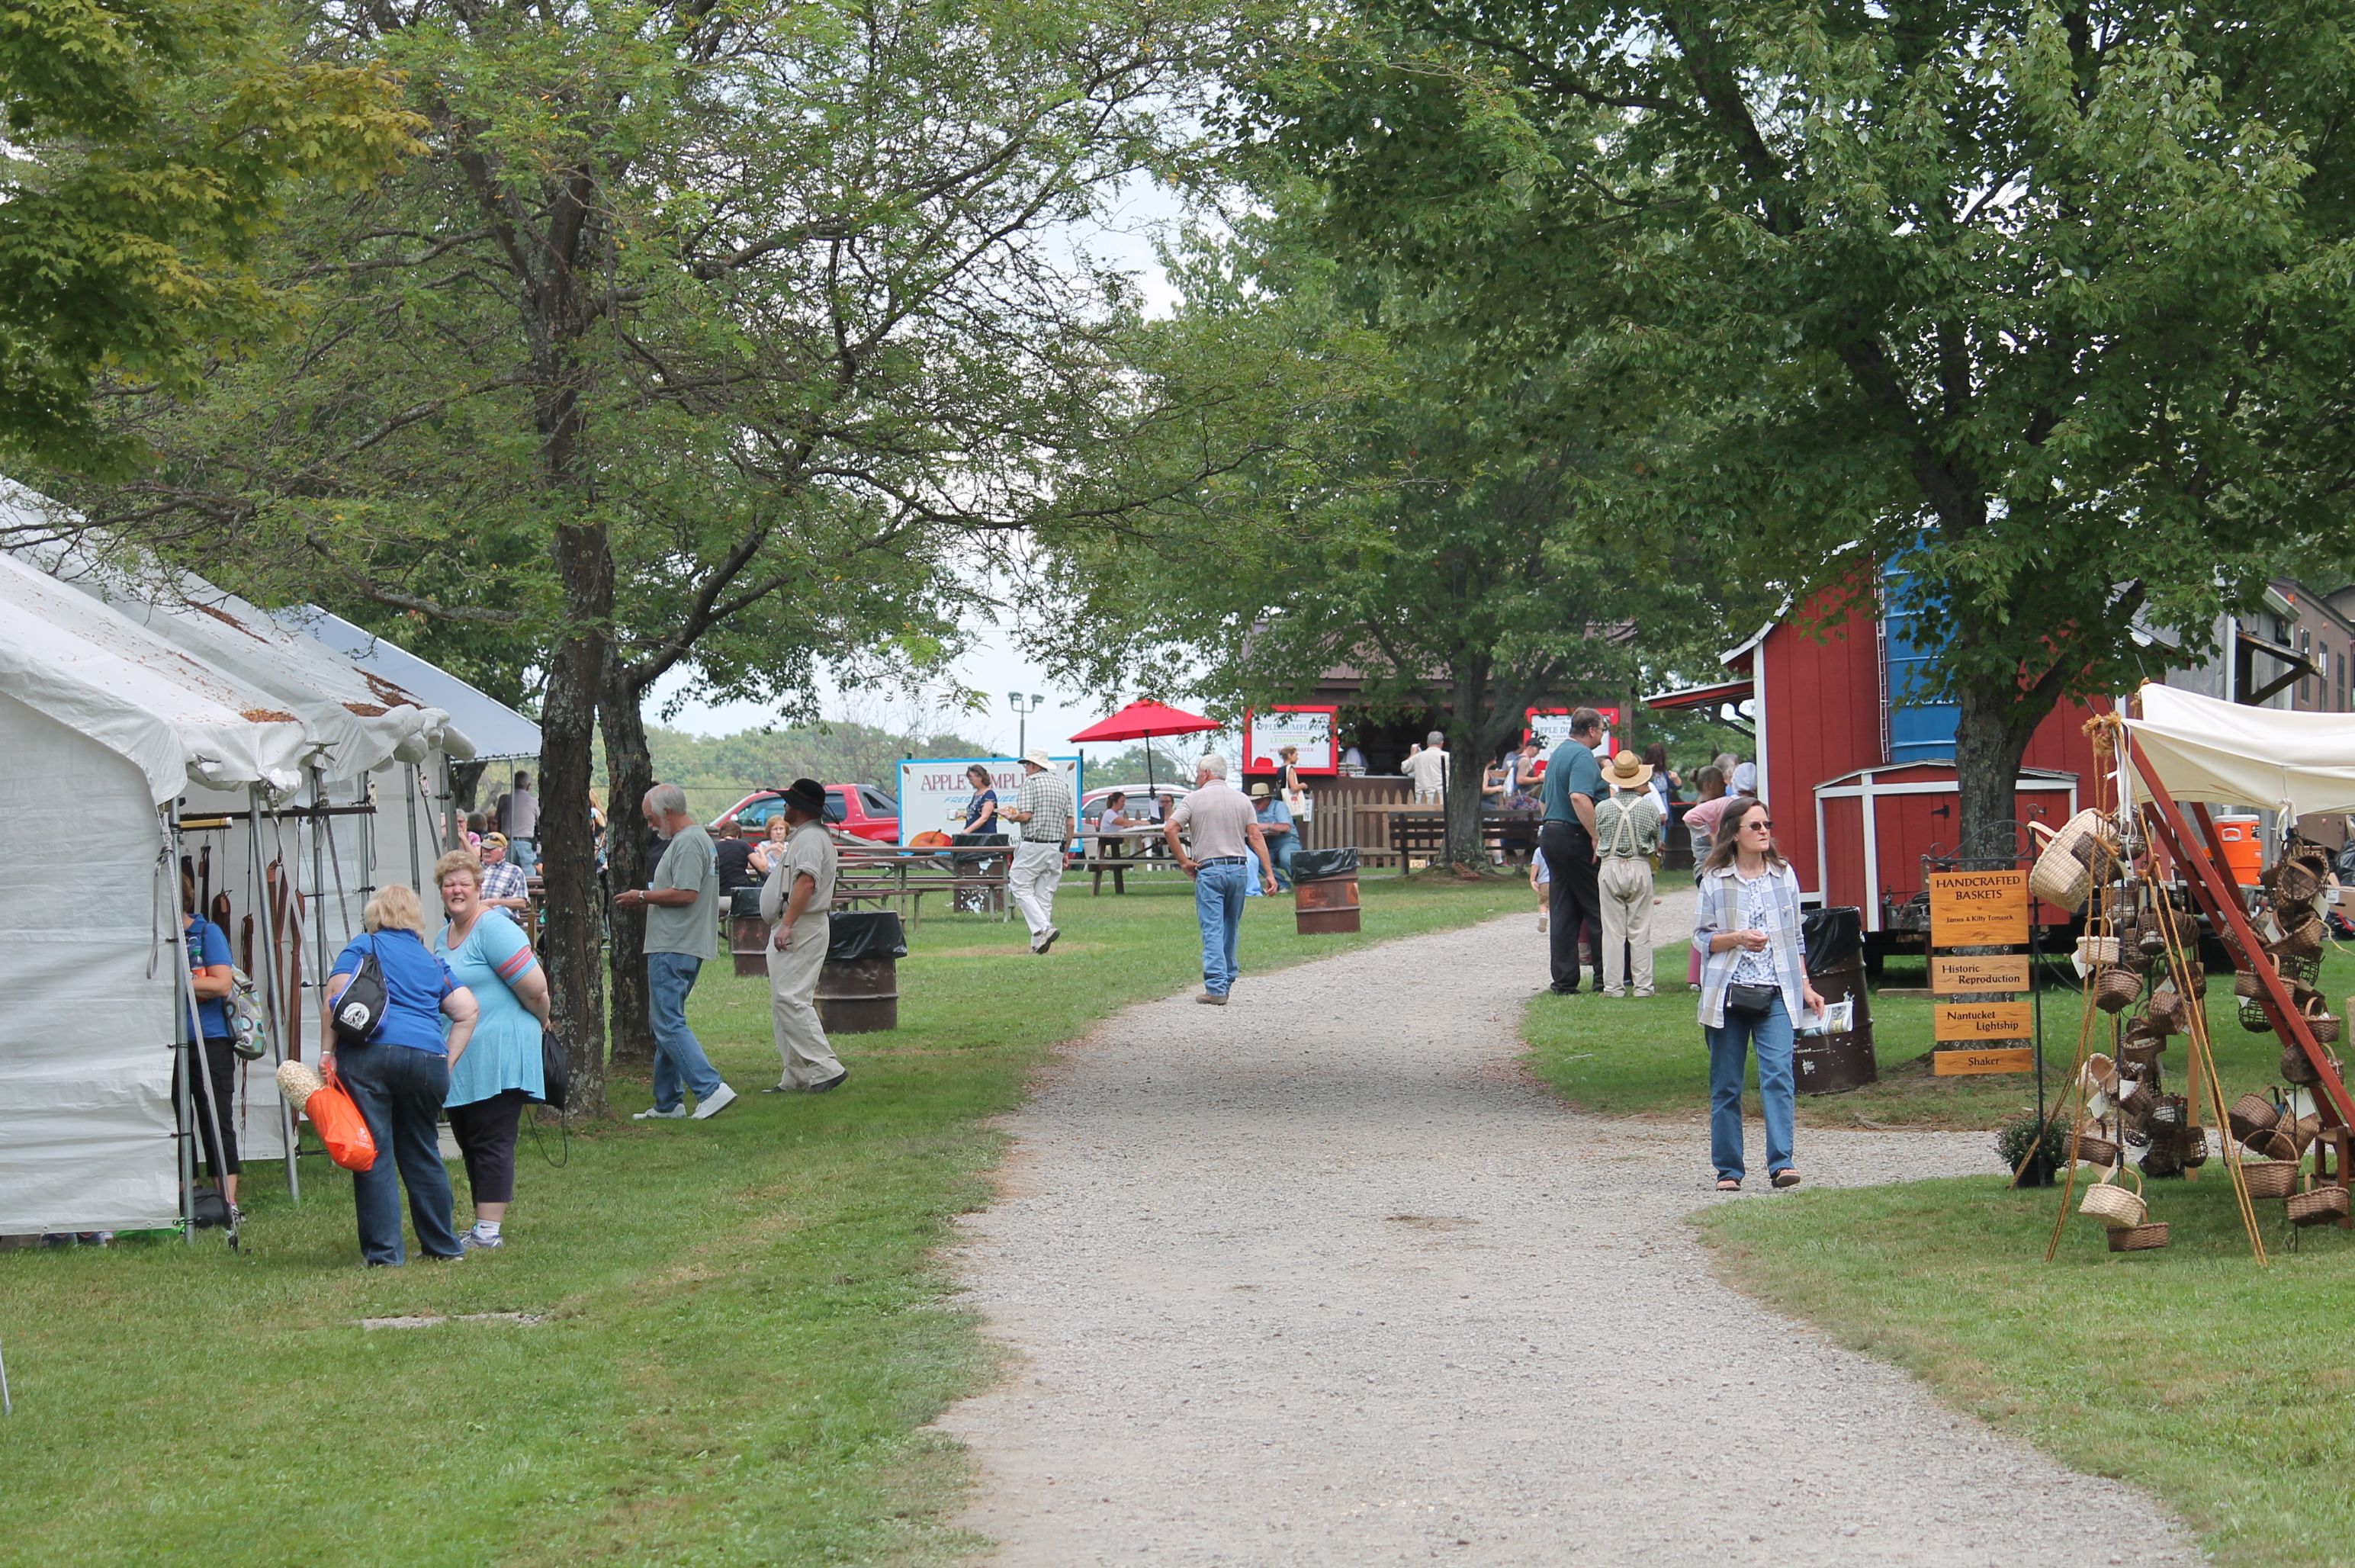 Crowd outdoors at Mountain Craft Days with tents along a gravel path.